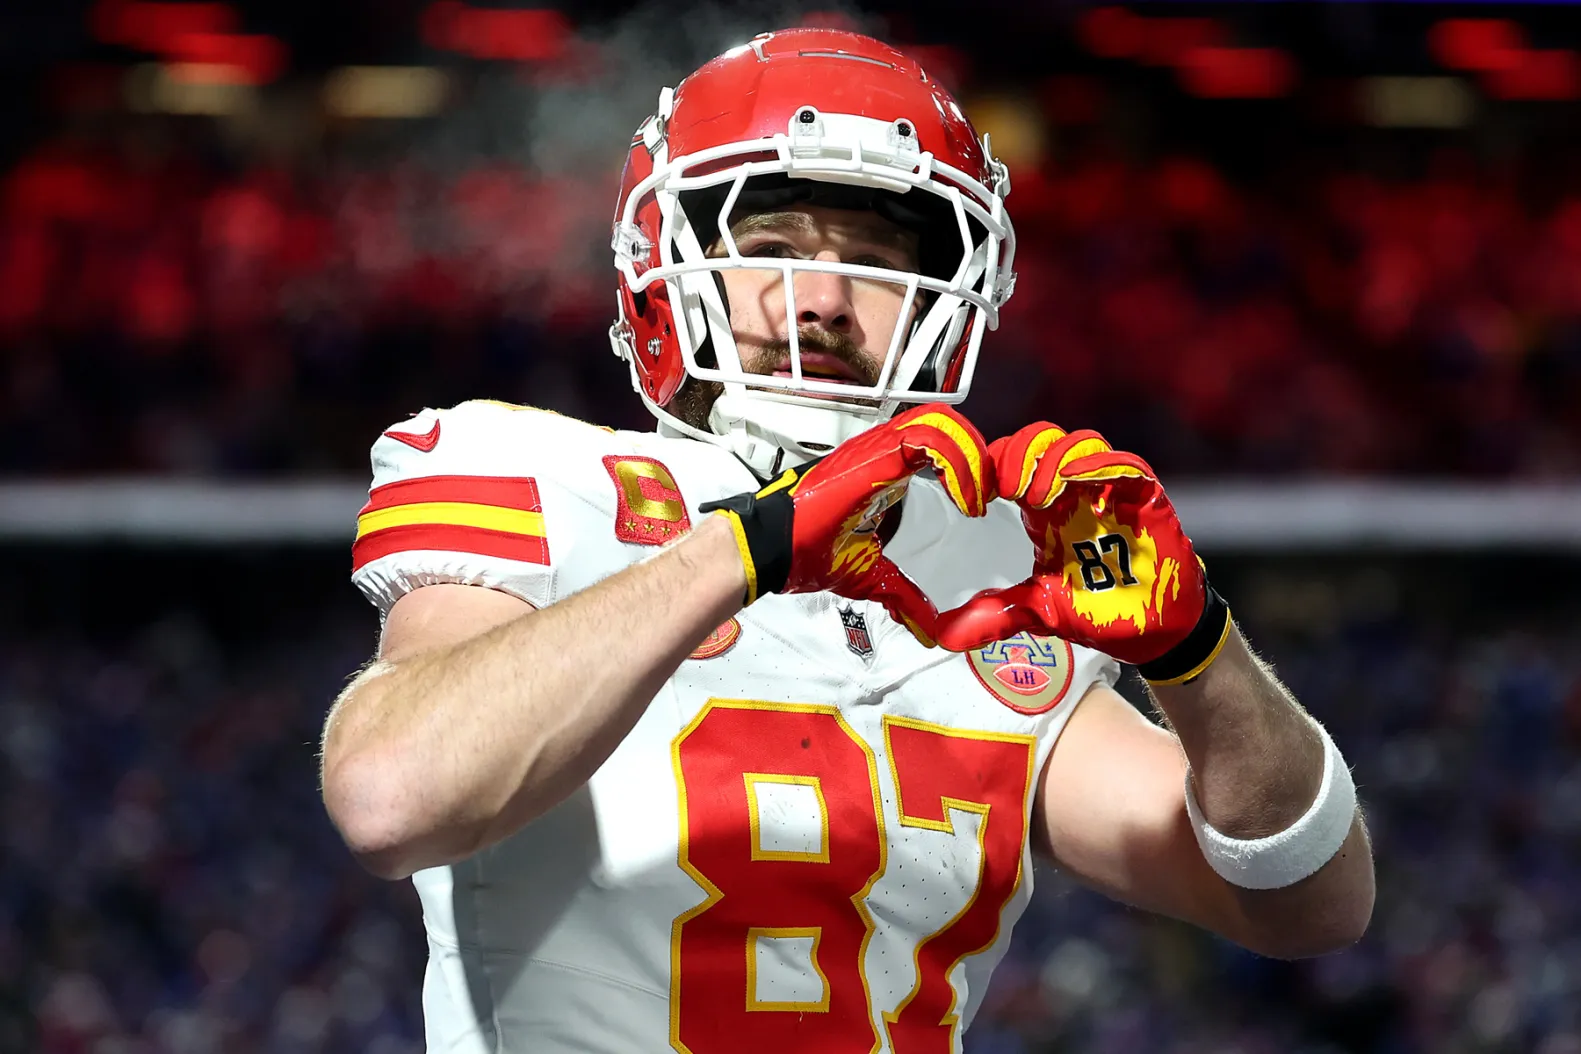  Chiefs Make Smart Move Travis Kelce Gets a Well-Earned Pay Boost Ahead of New NFL Season---